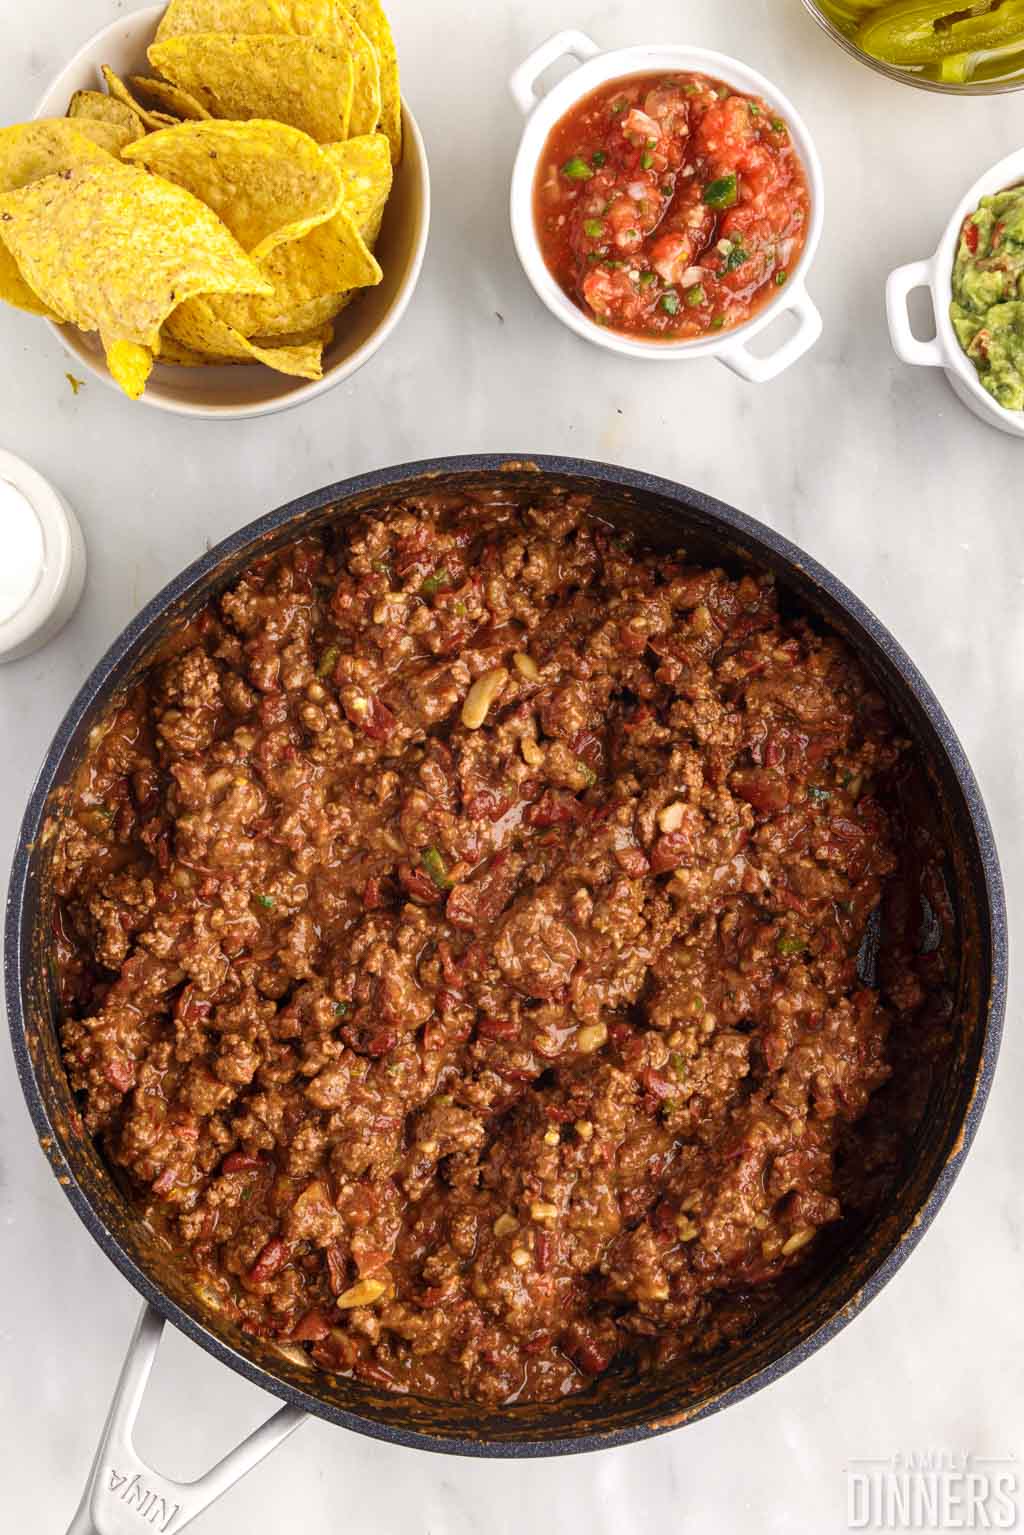 Mixed ground beef and beans in a skillet.